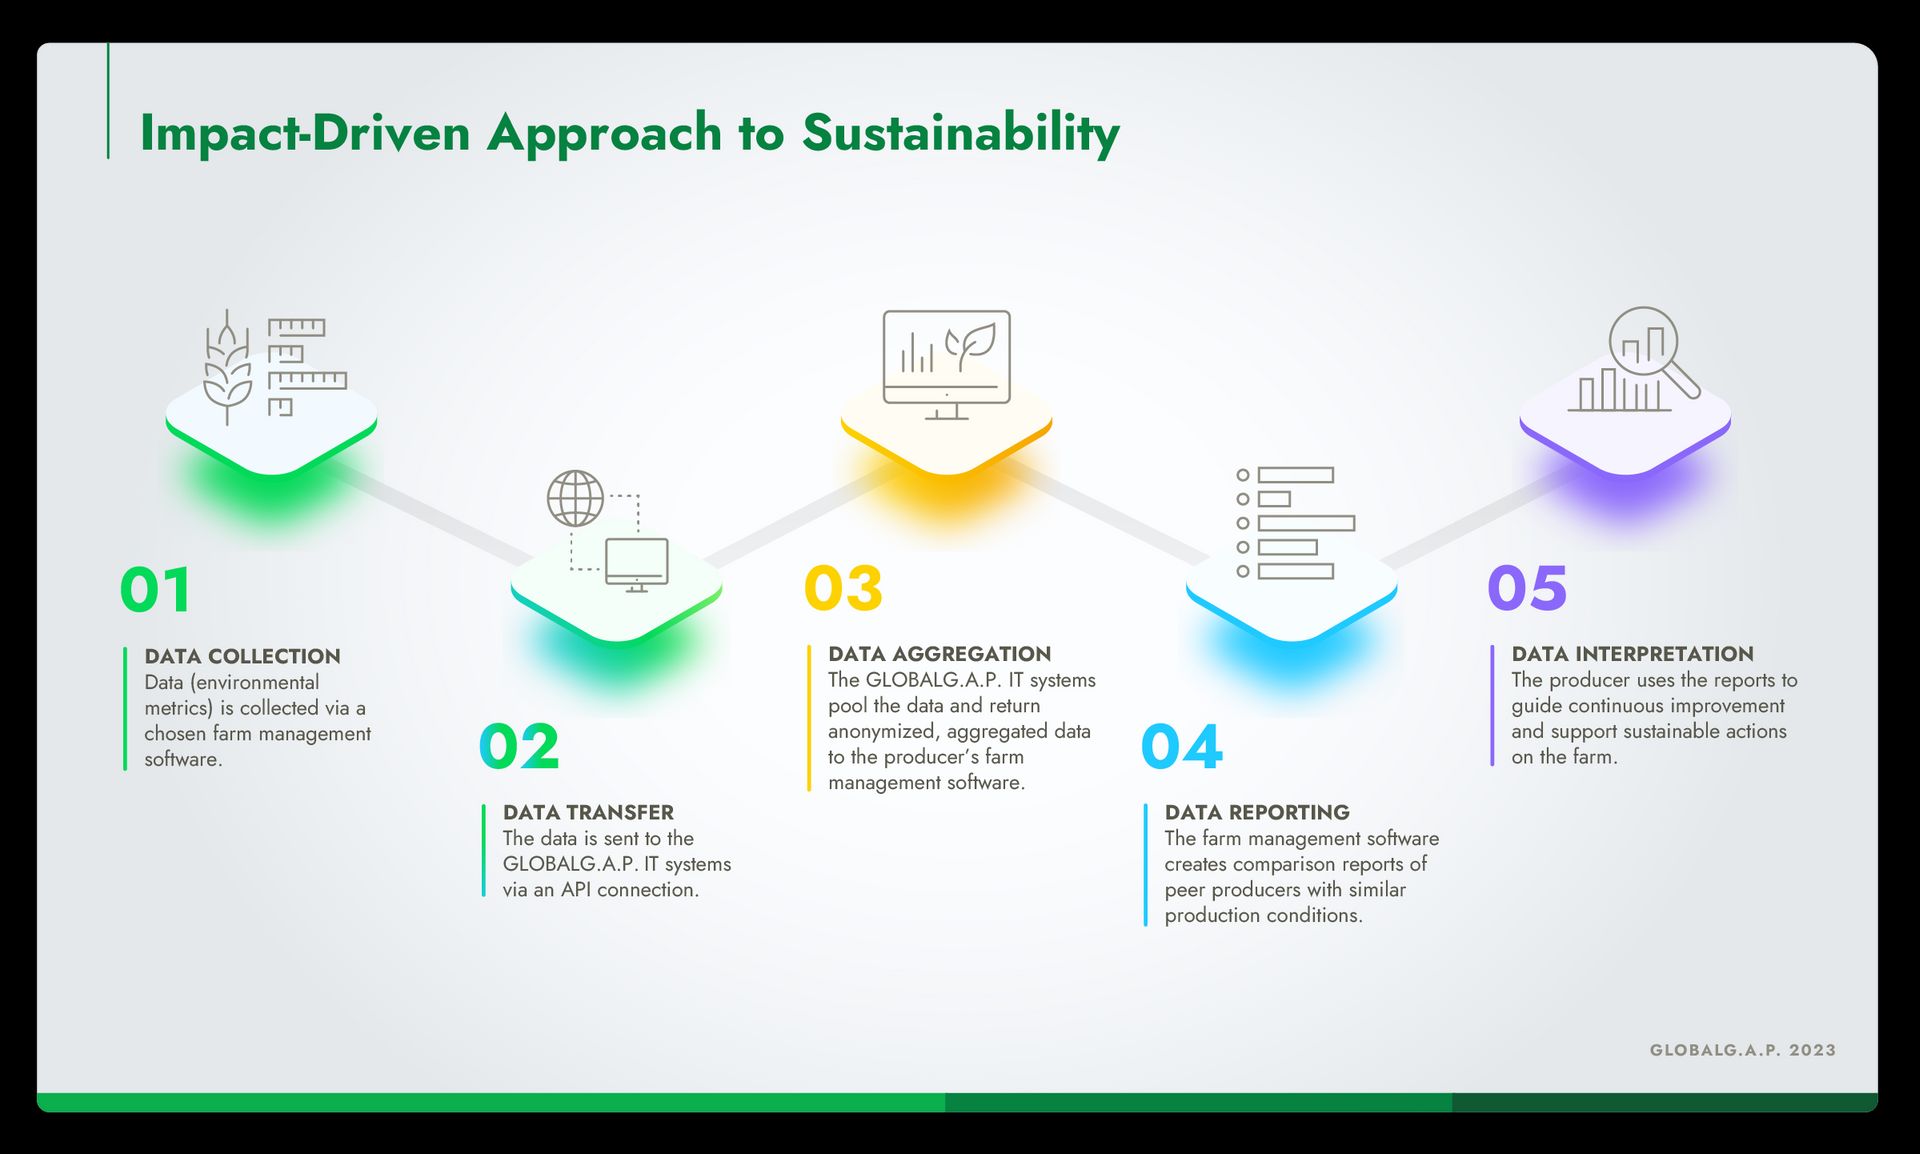 Infographic showing the five-step process of the Impact-Driven Approach to Sustainability